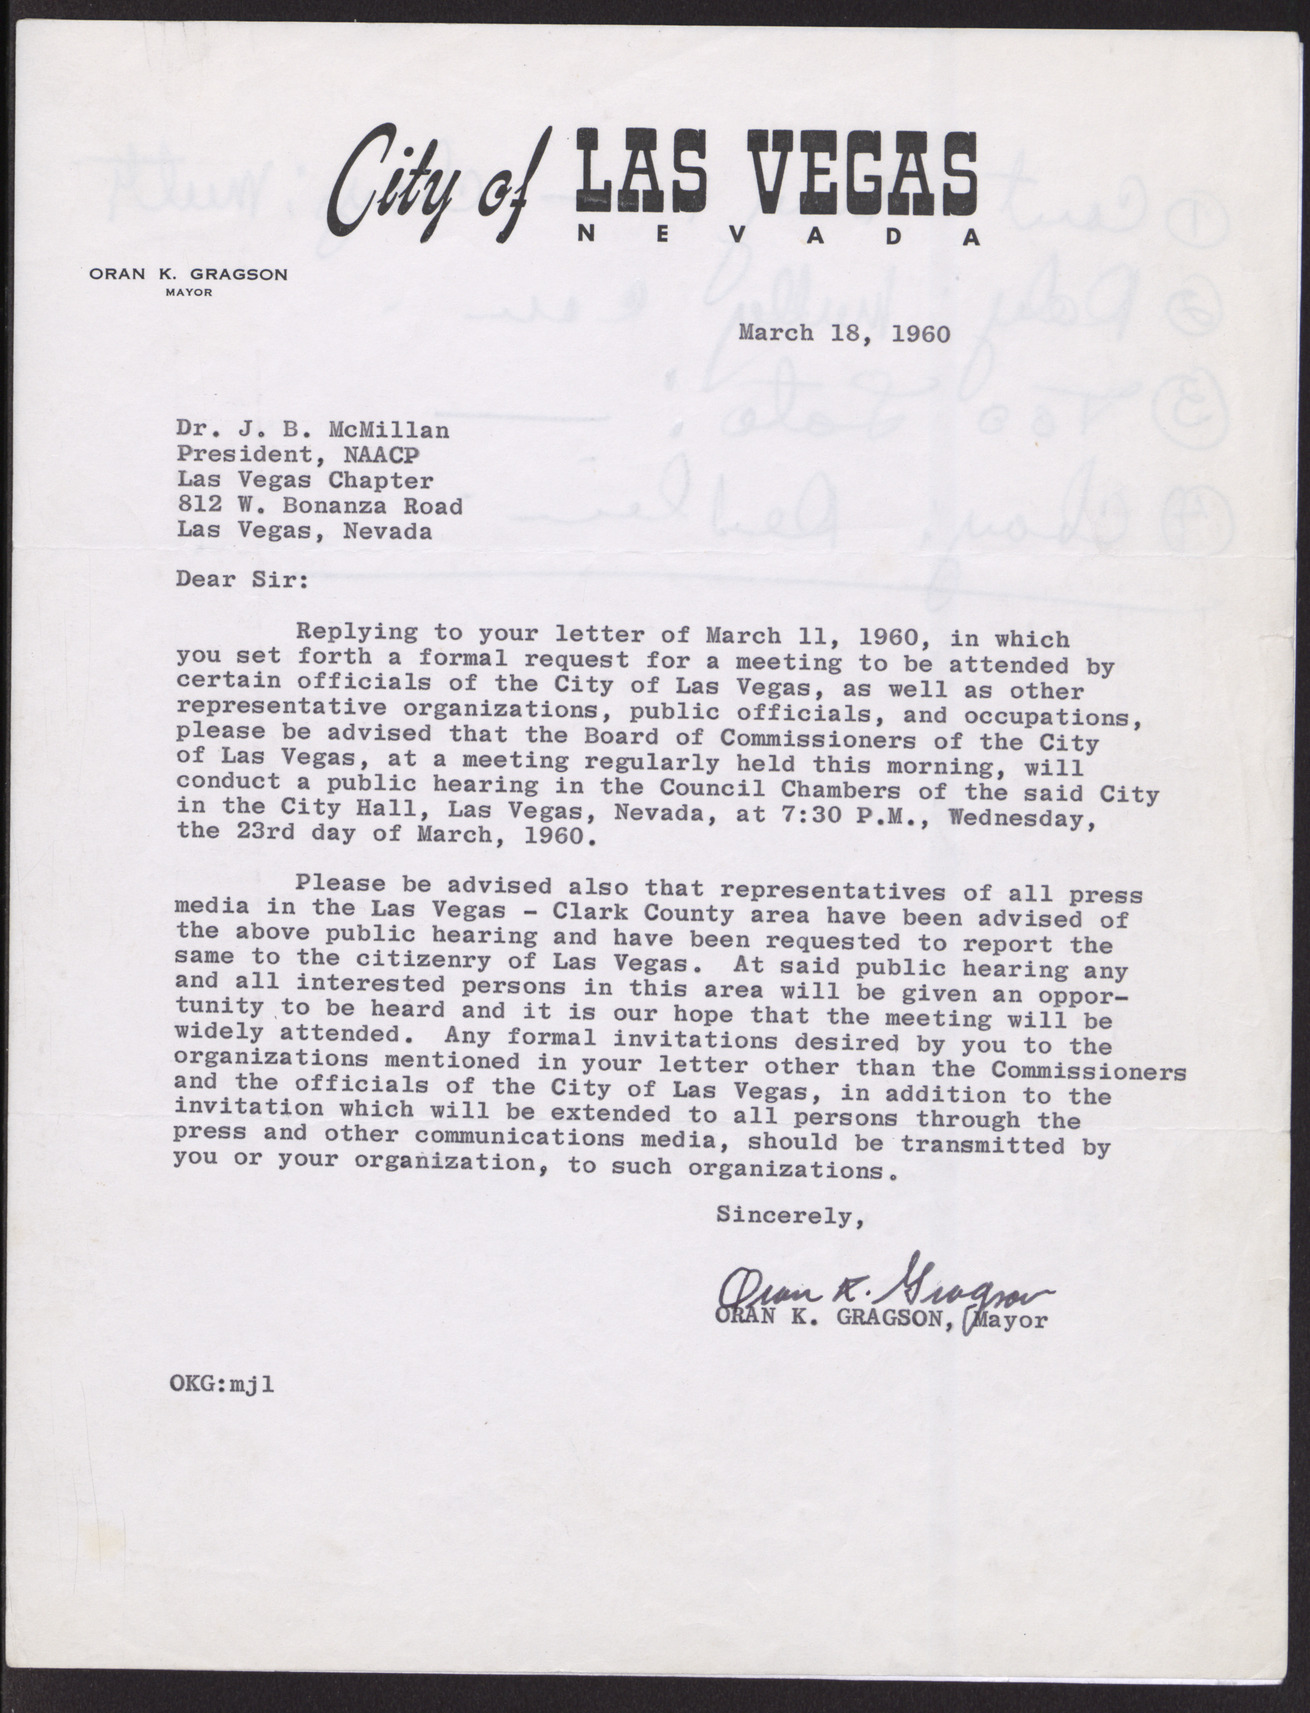 Letter to Dr. J. B. McMillan from Oran K. Gragson, March 18, 1960